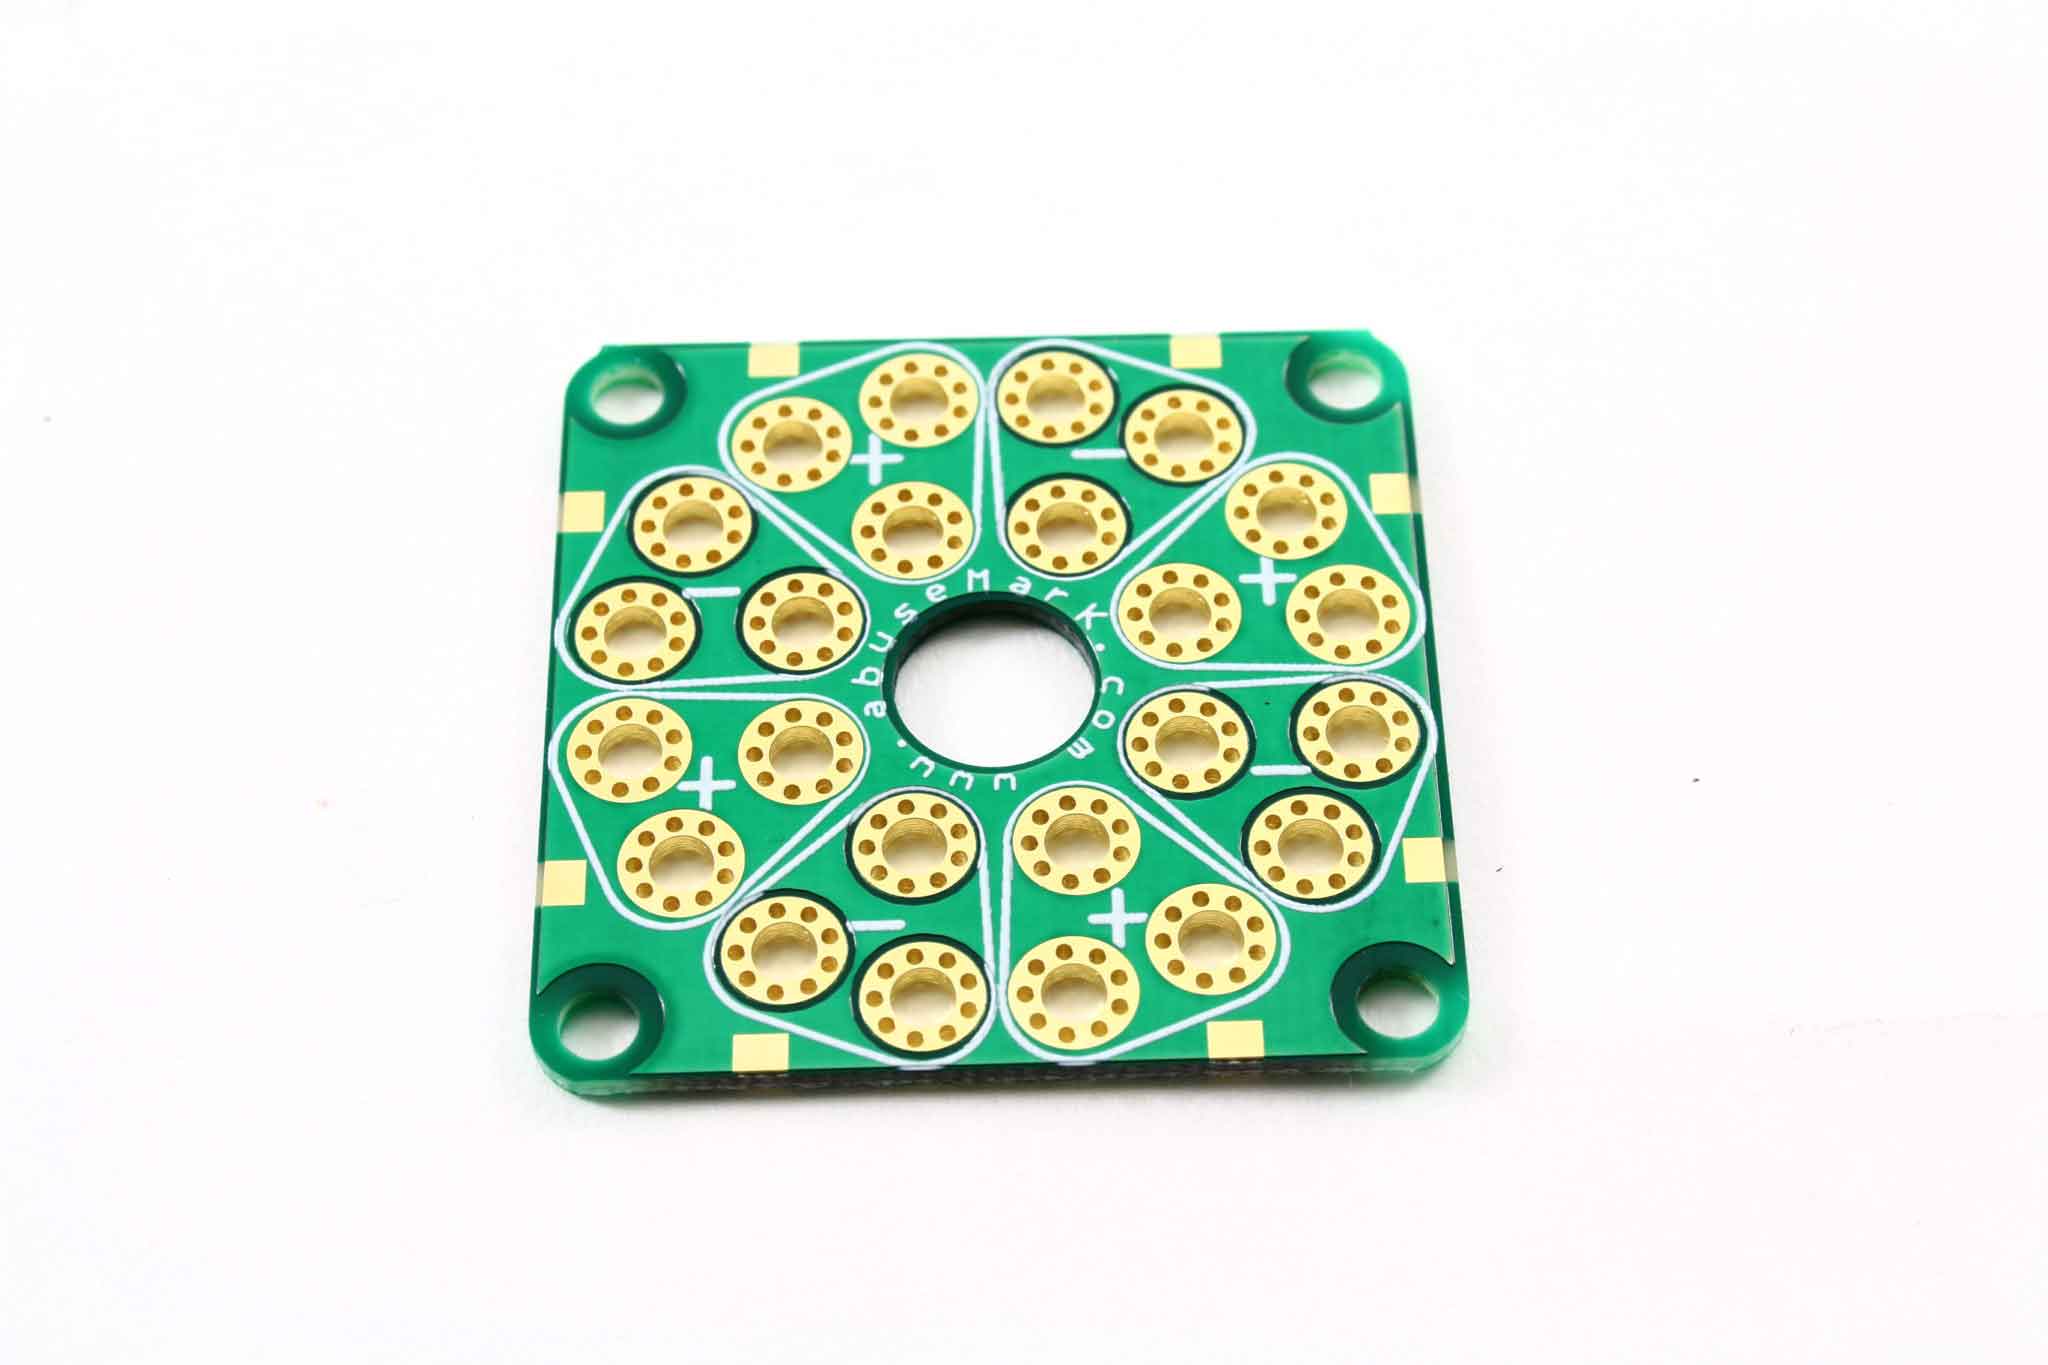 3 Oz power distribution board for Naze32 or CC3D Front Side